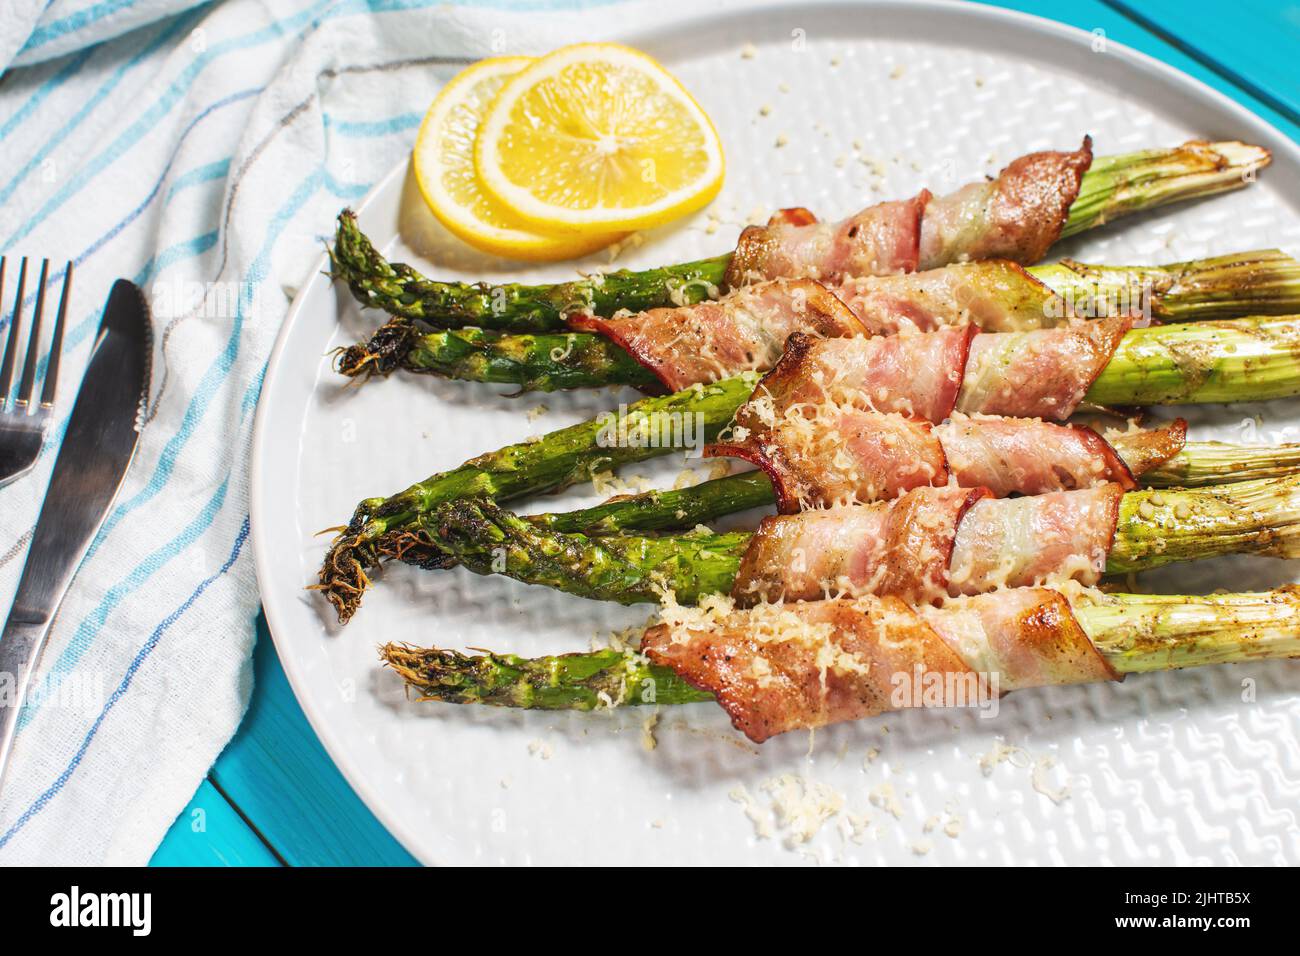 Grilled green asparagus wrapped with bacon. Ketogenic diet. Healthy food, diet menu. Stock Photo